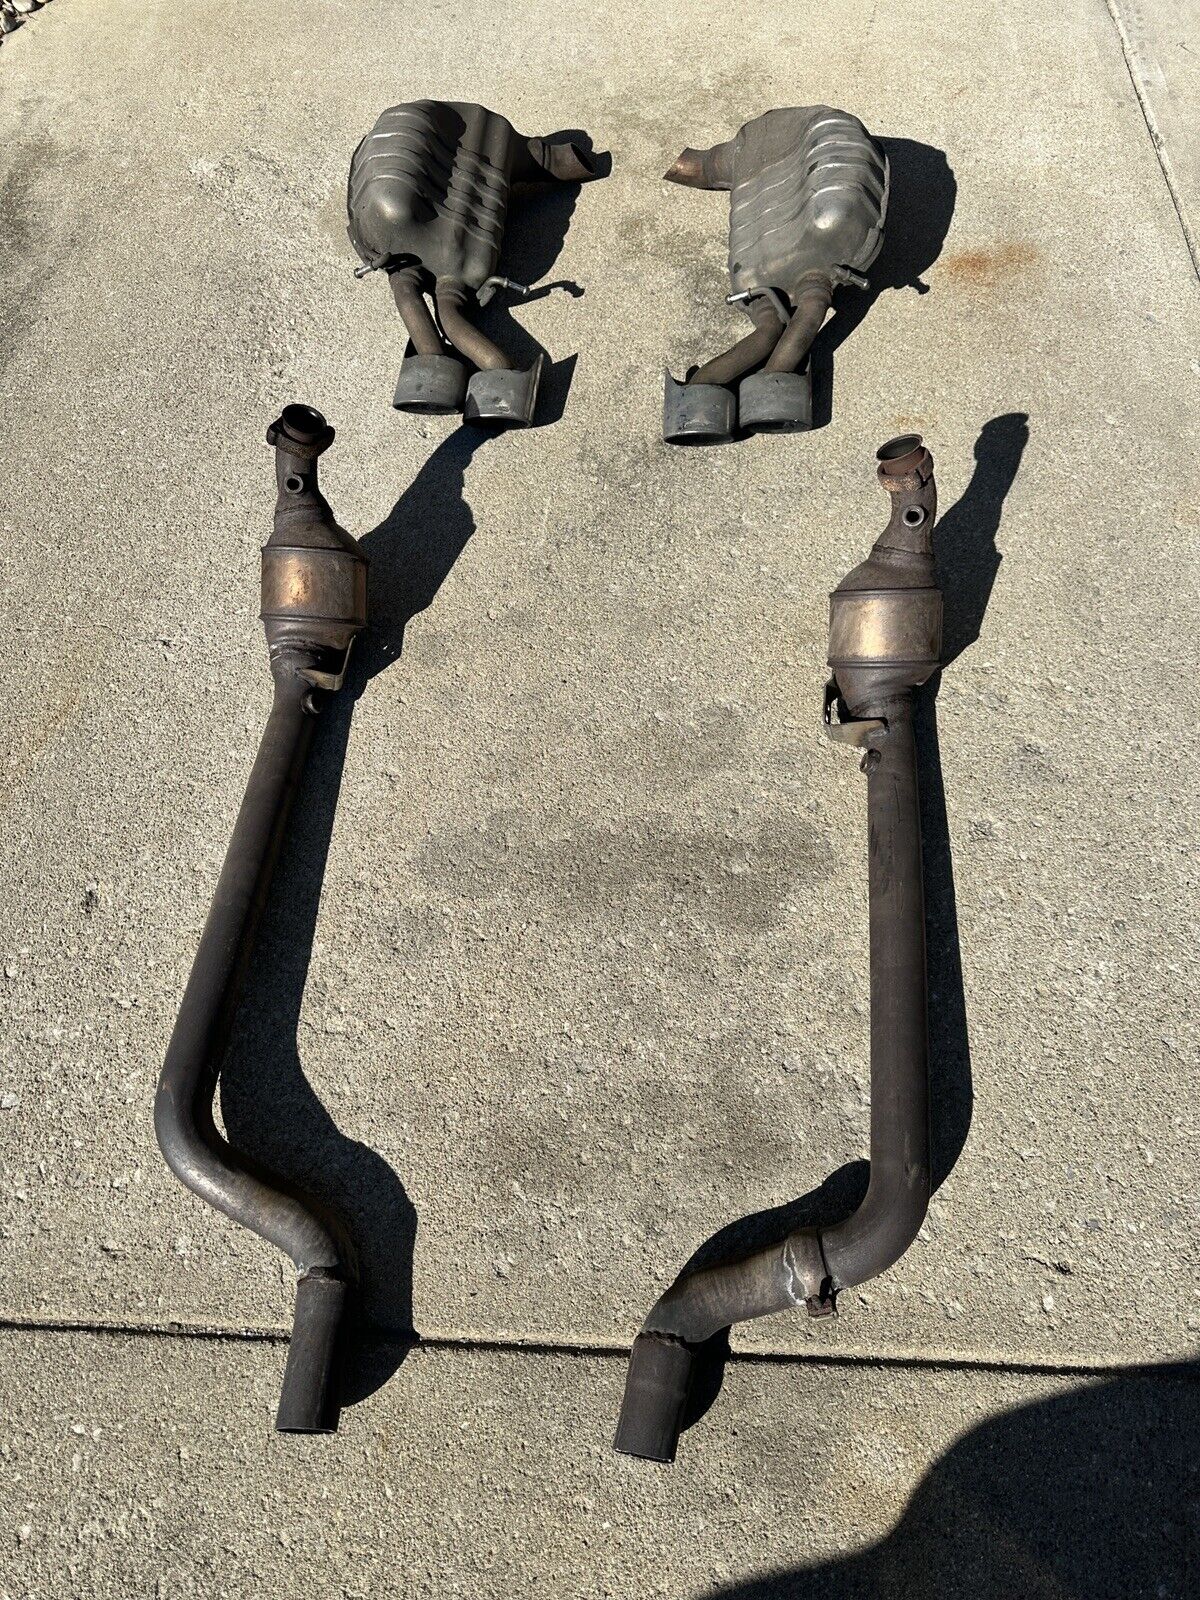 C63 AMG 2012 W204 OEM EXHAUST WITH Catalyst Converters